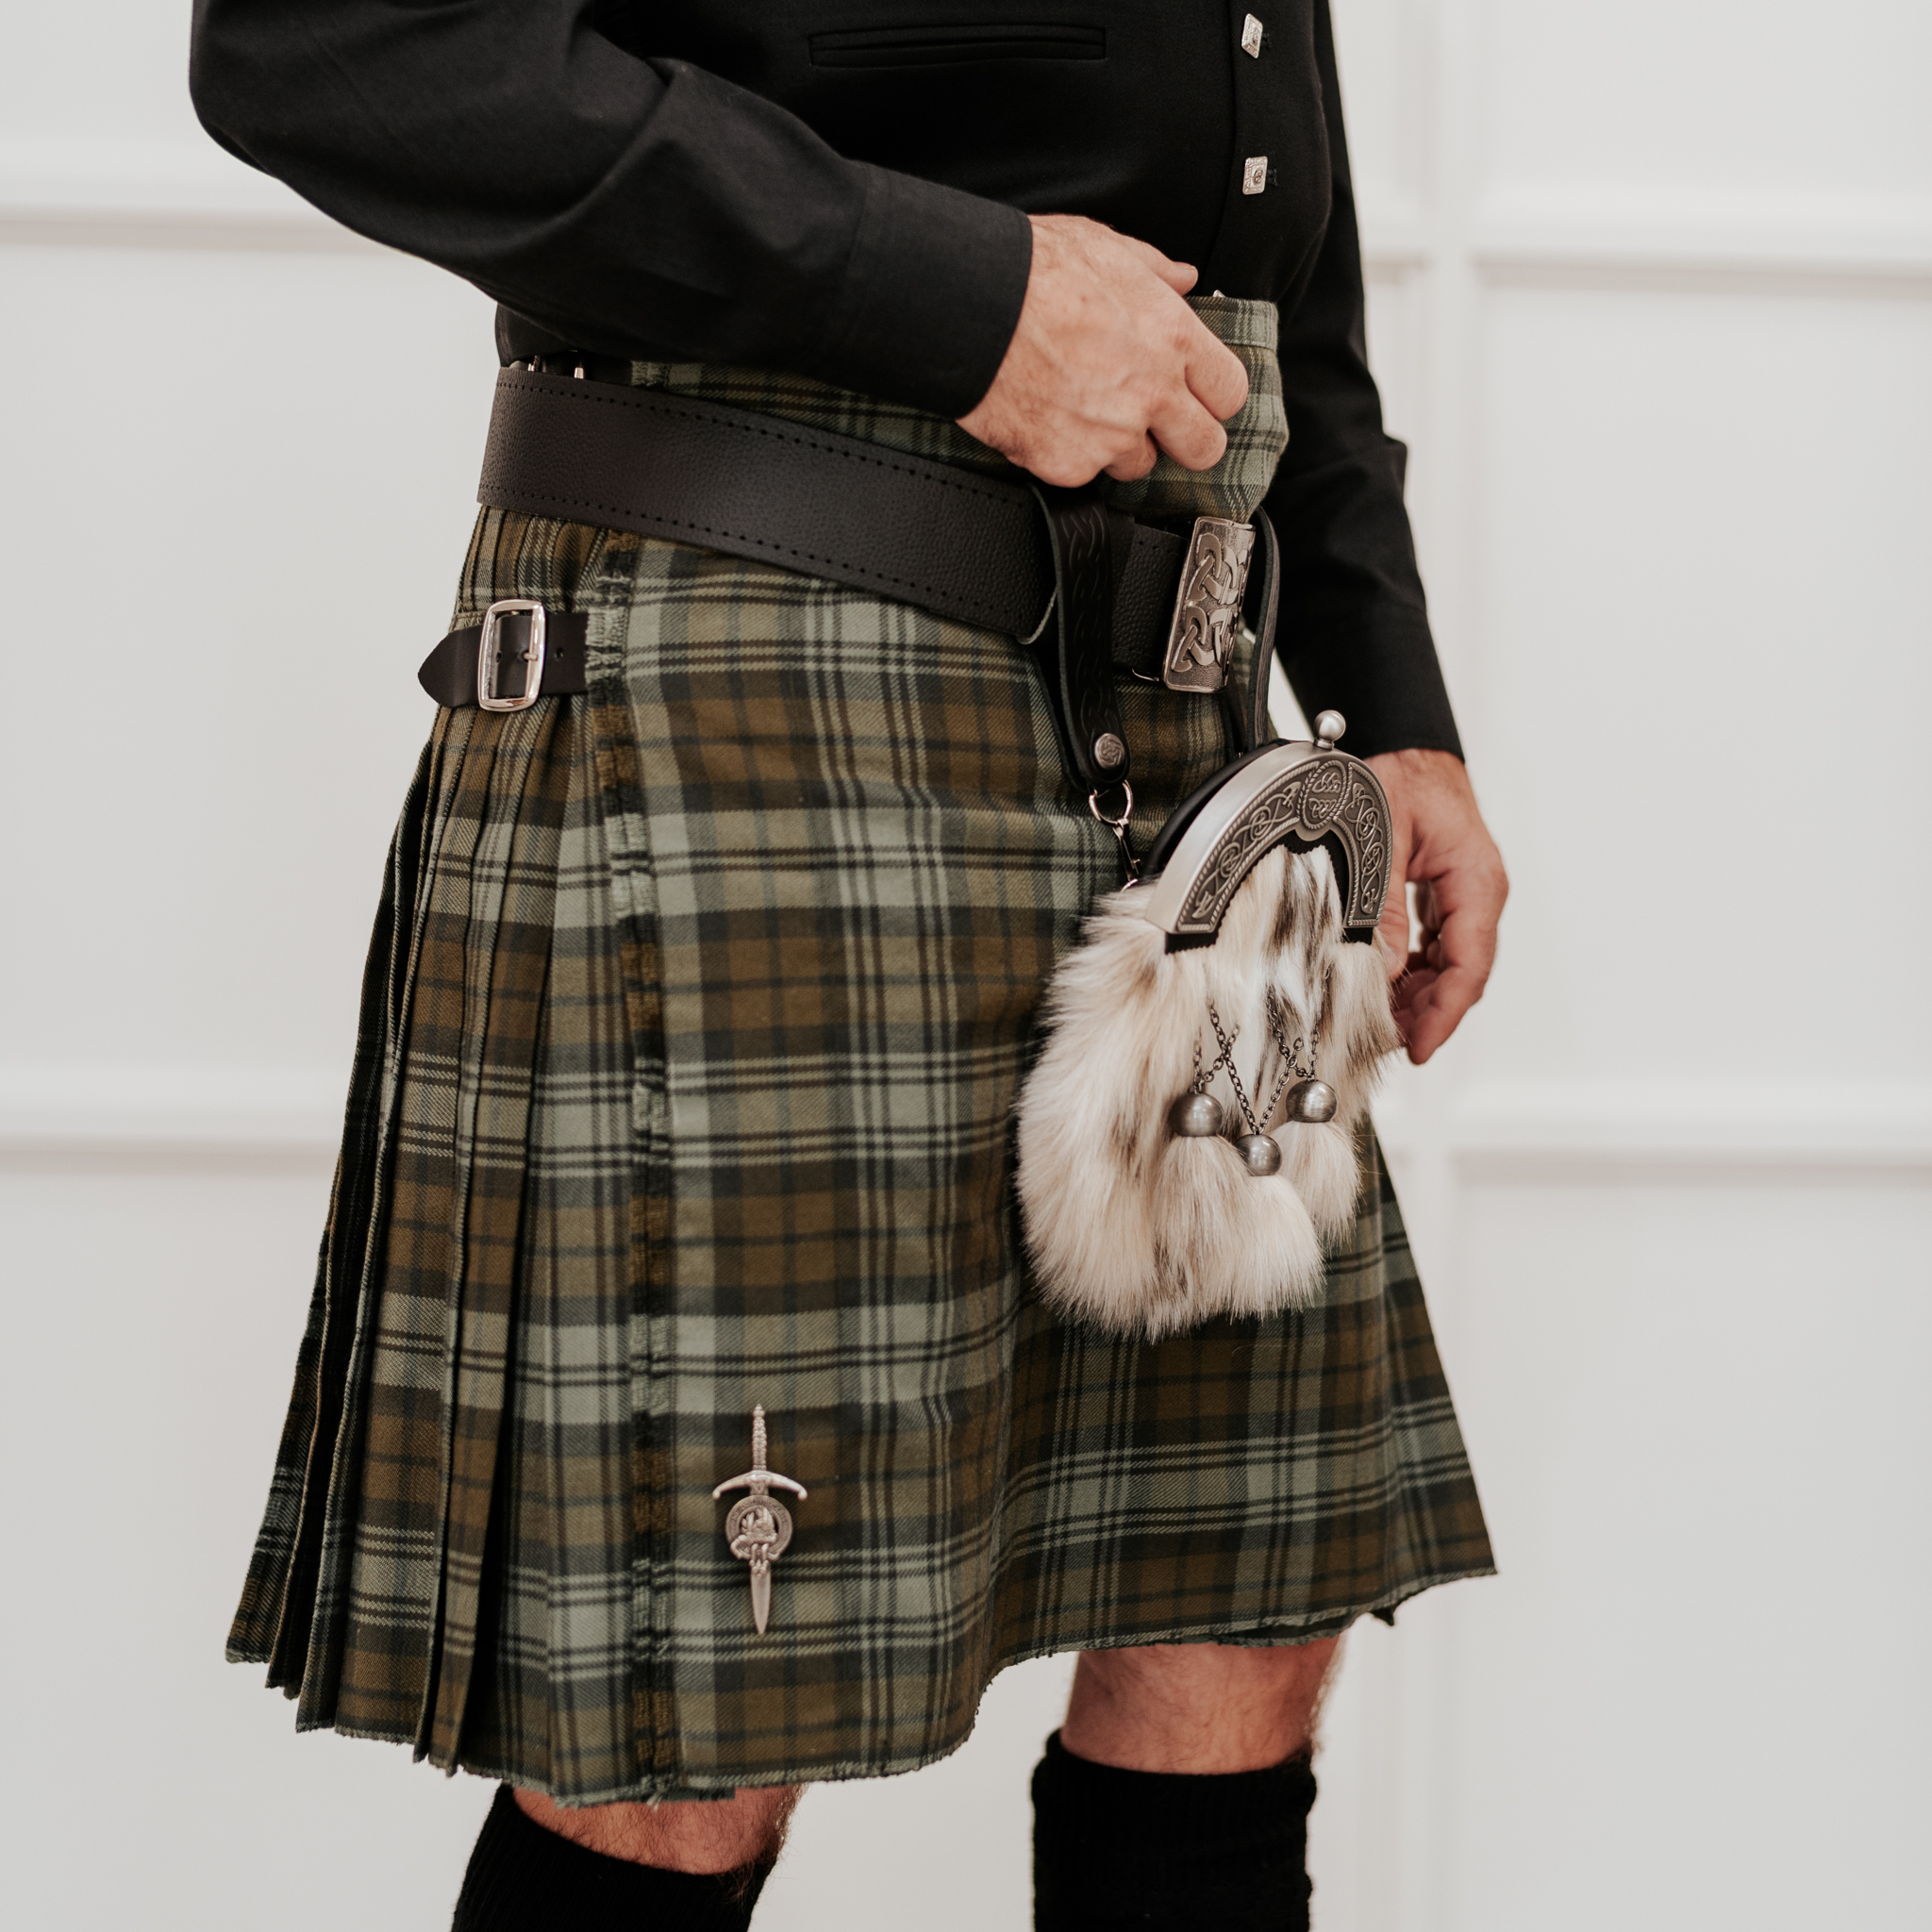 Largest Selection of Kilts for sale available - Order your kilt online today